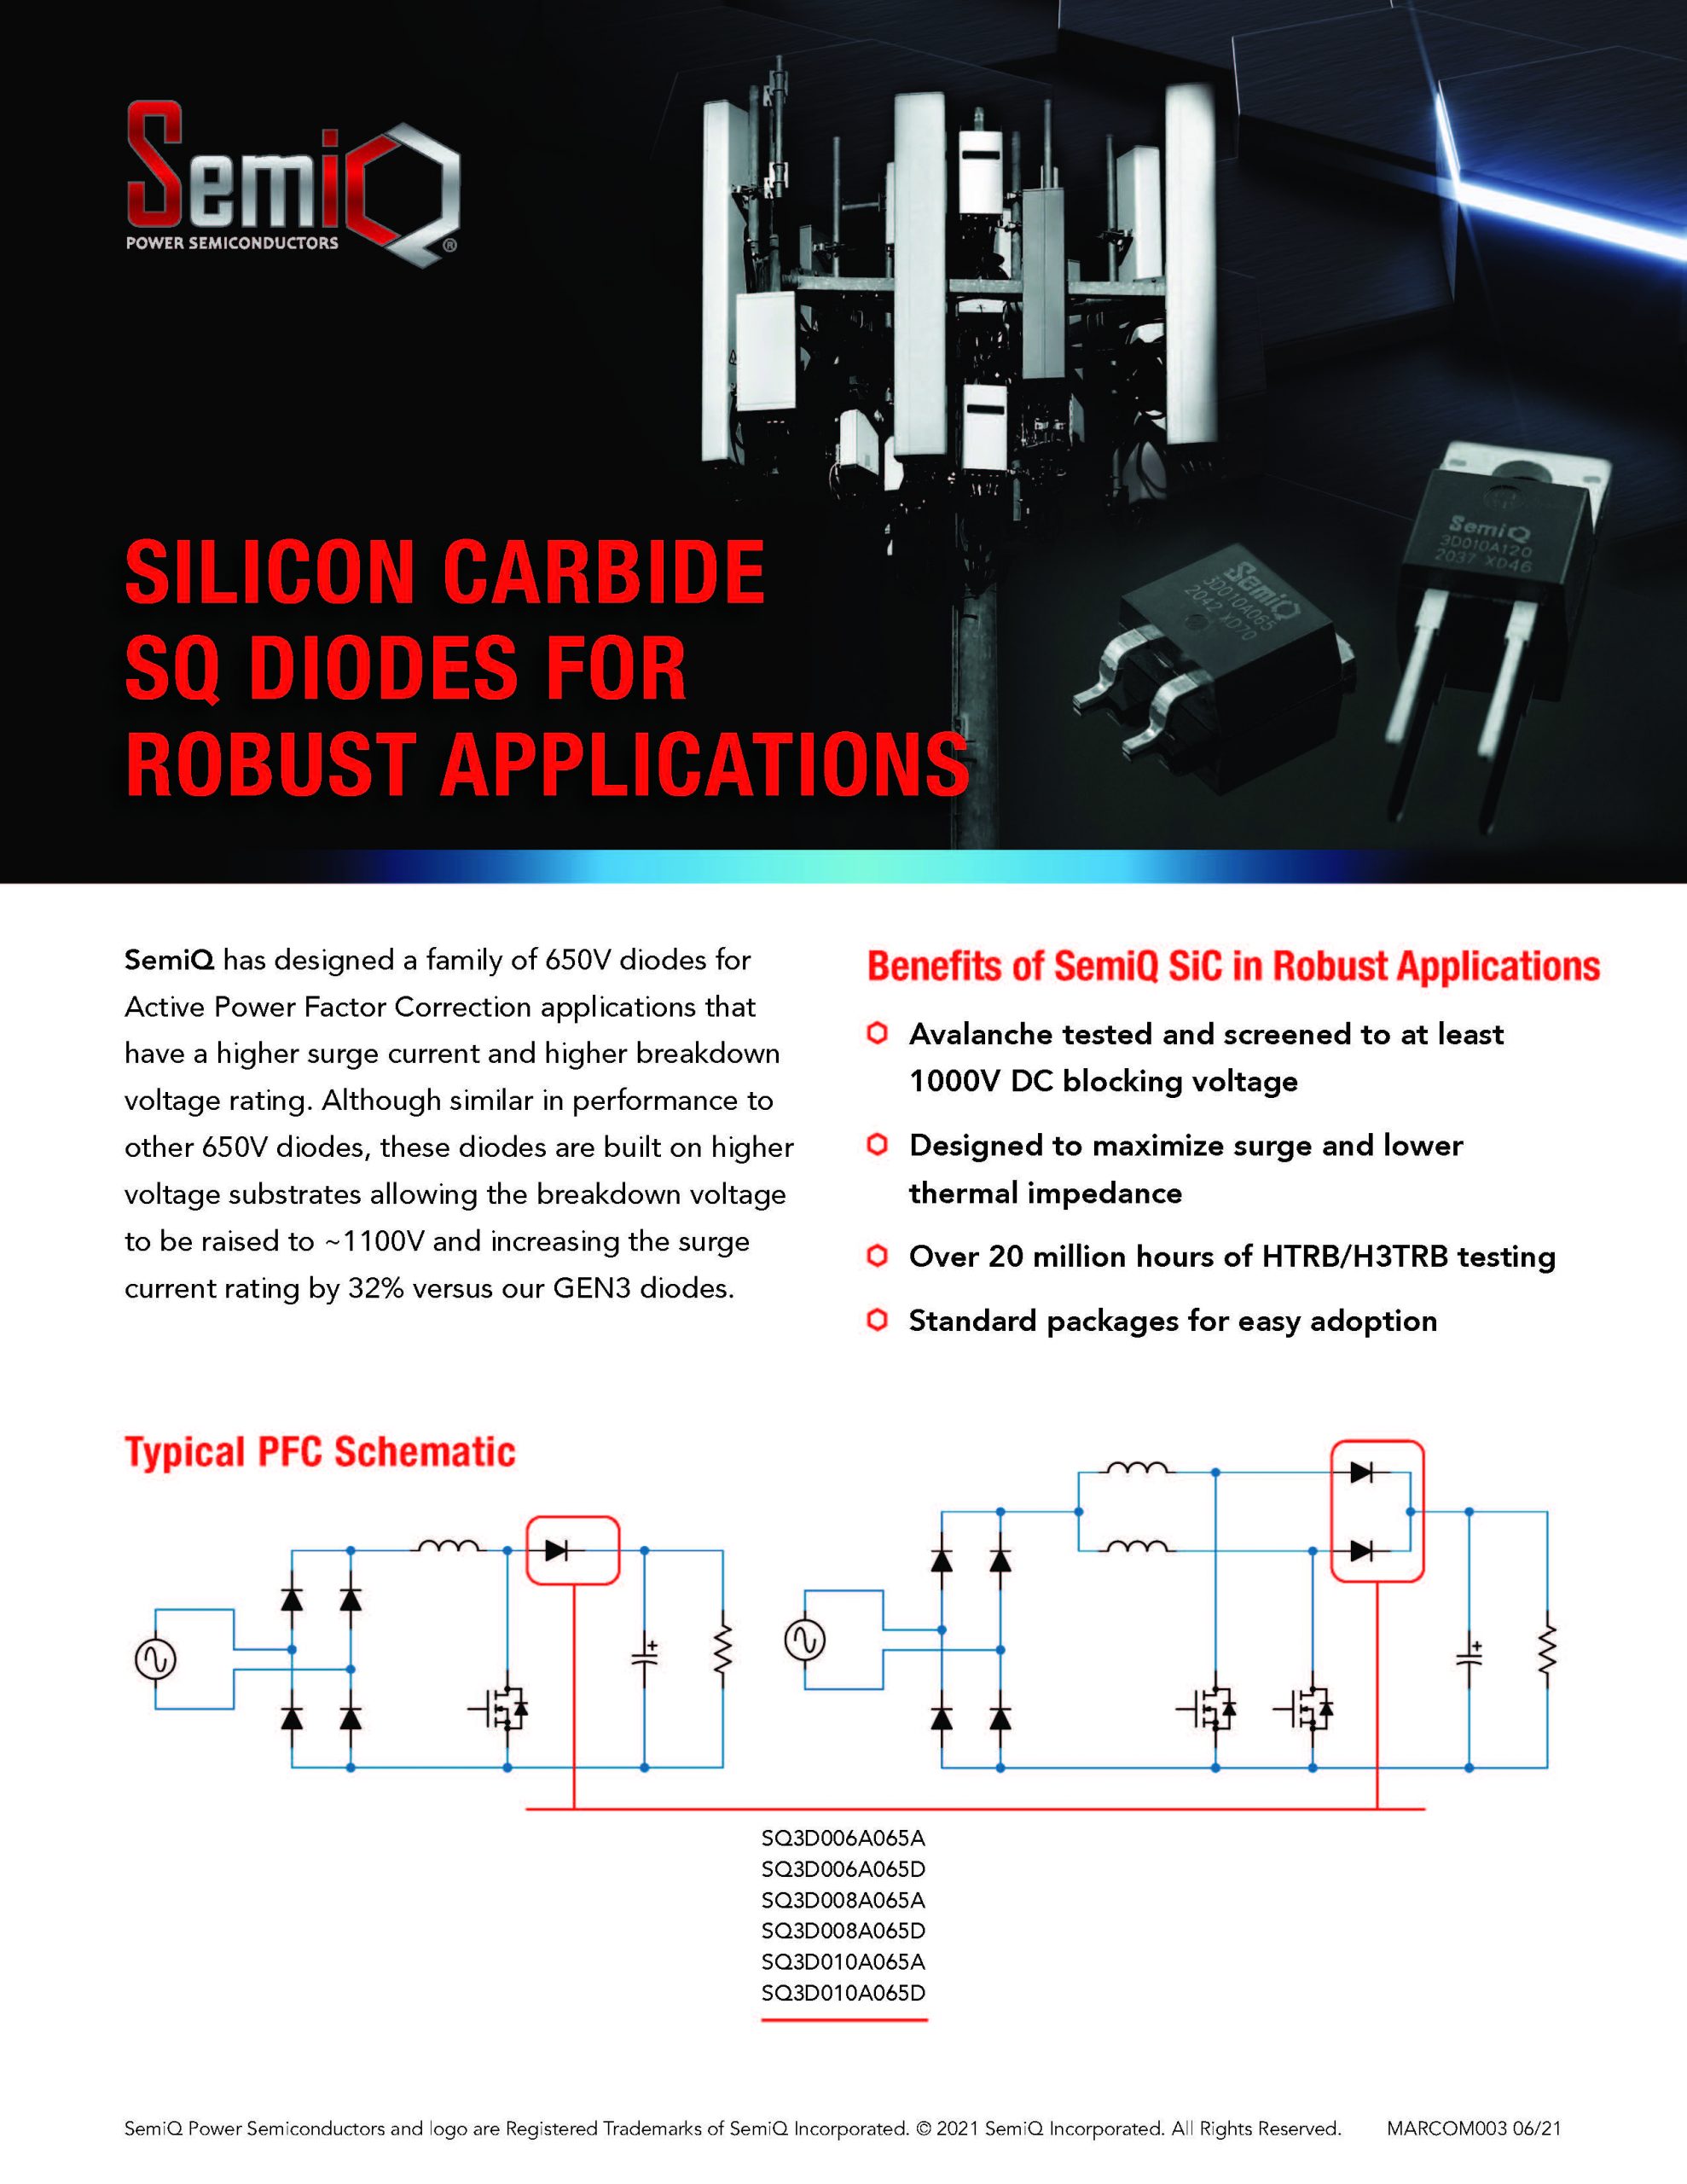 SemiQ - Silicon Carbide SQ Diodes For Robust Applications